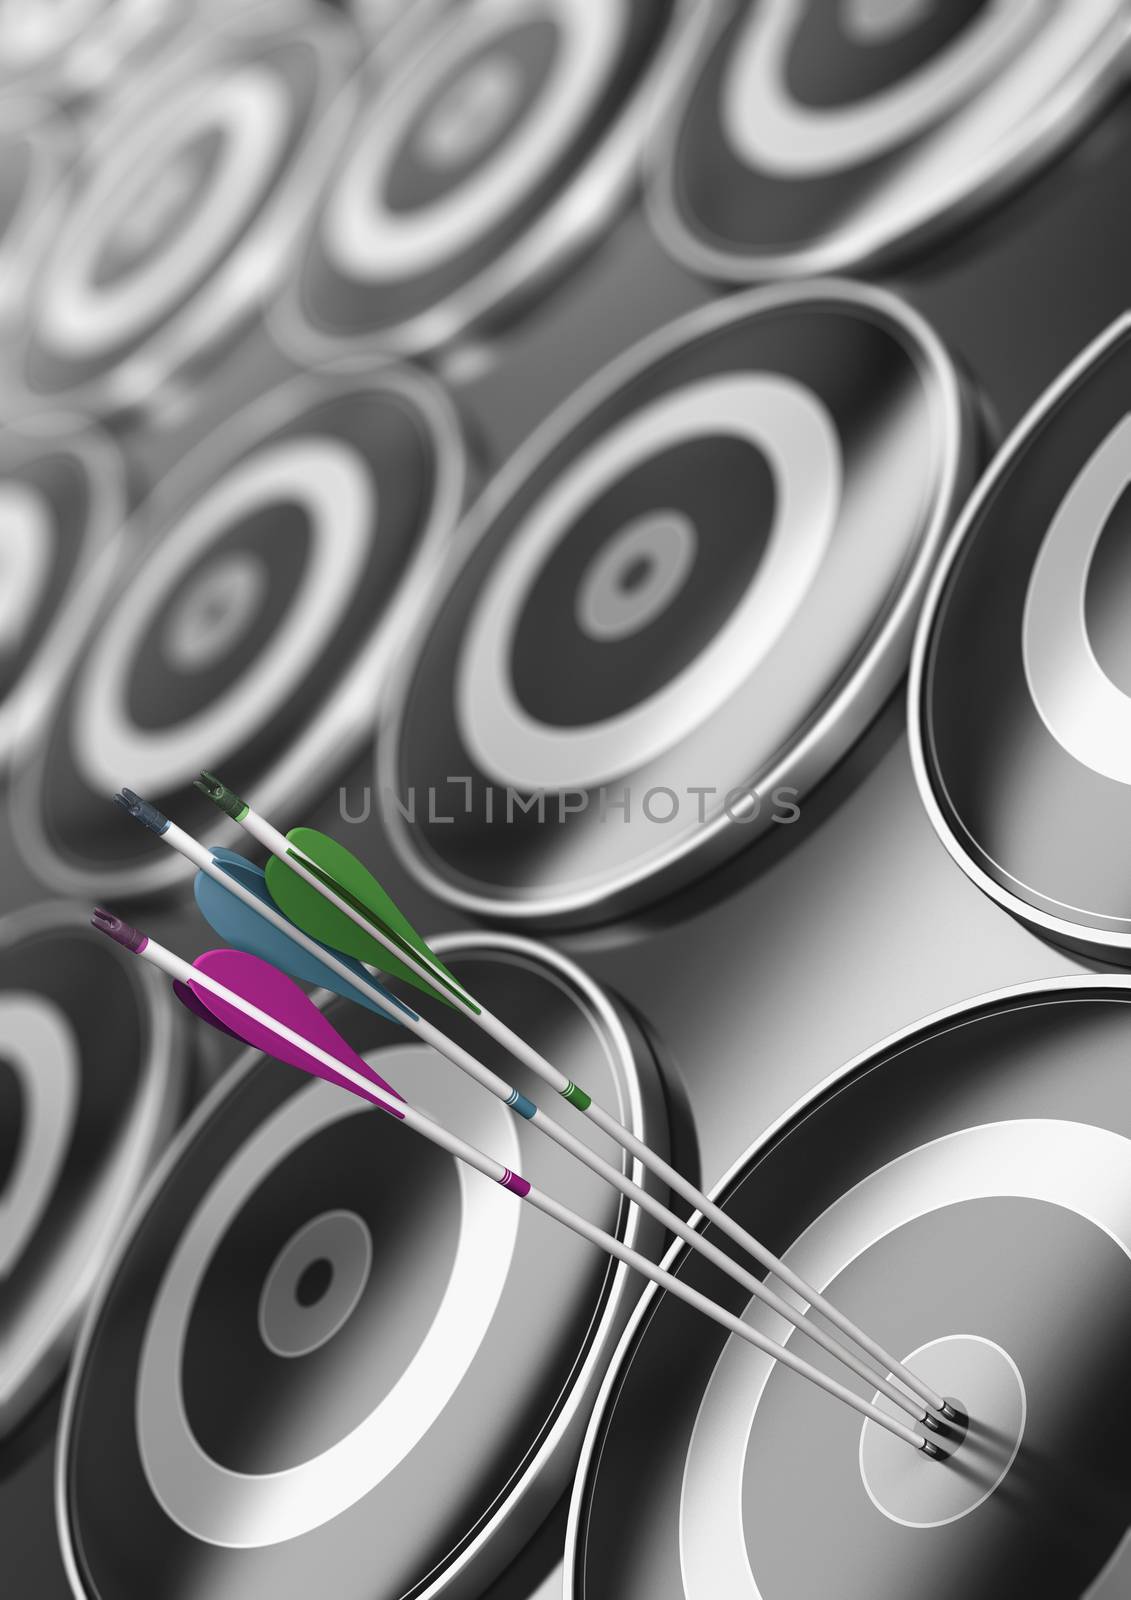 3D illustration of three arrows with different colors hitting center of a black target. Business or marketing concept